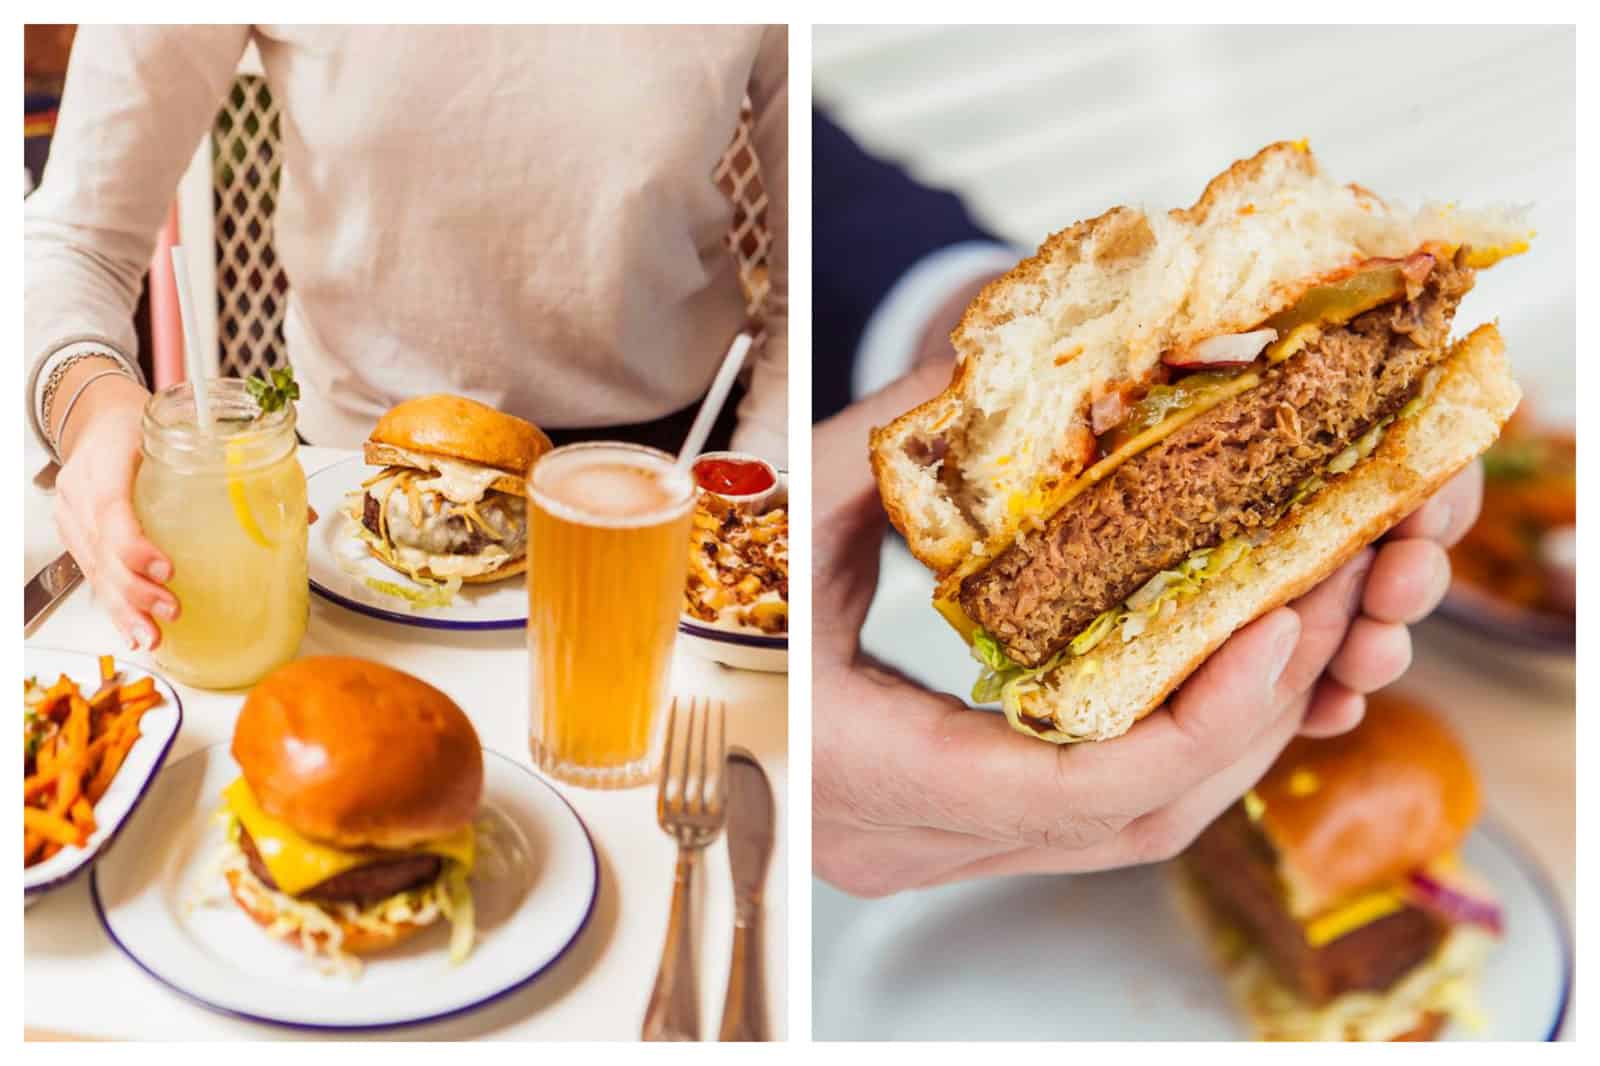 One of the best places to go for a burger in Paris is PNY for its perfect burger buns and cocktails (left). PNY burgers are filled with meaty burgers, cheese and crispy lettuce (right).